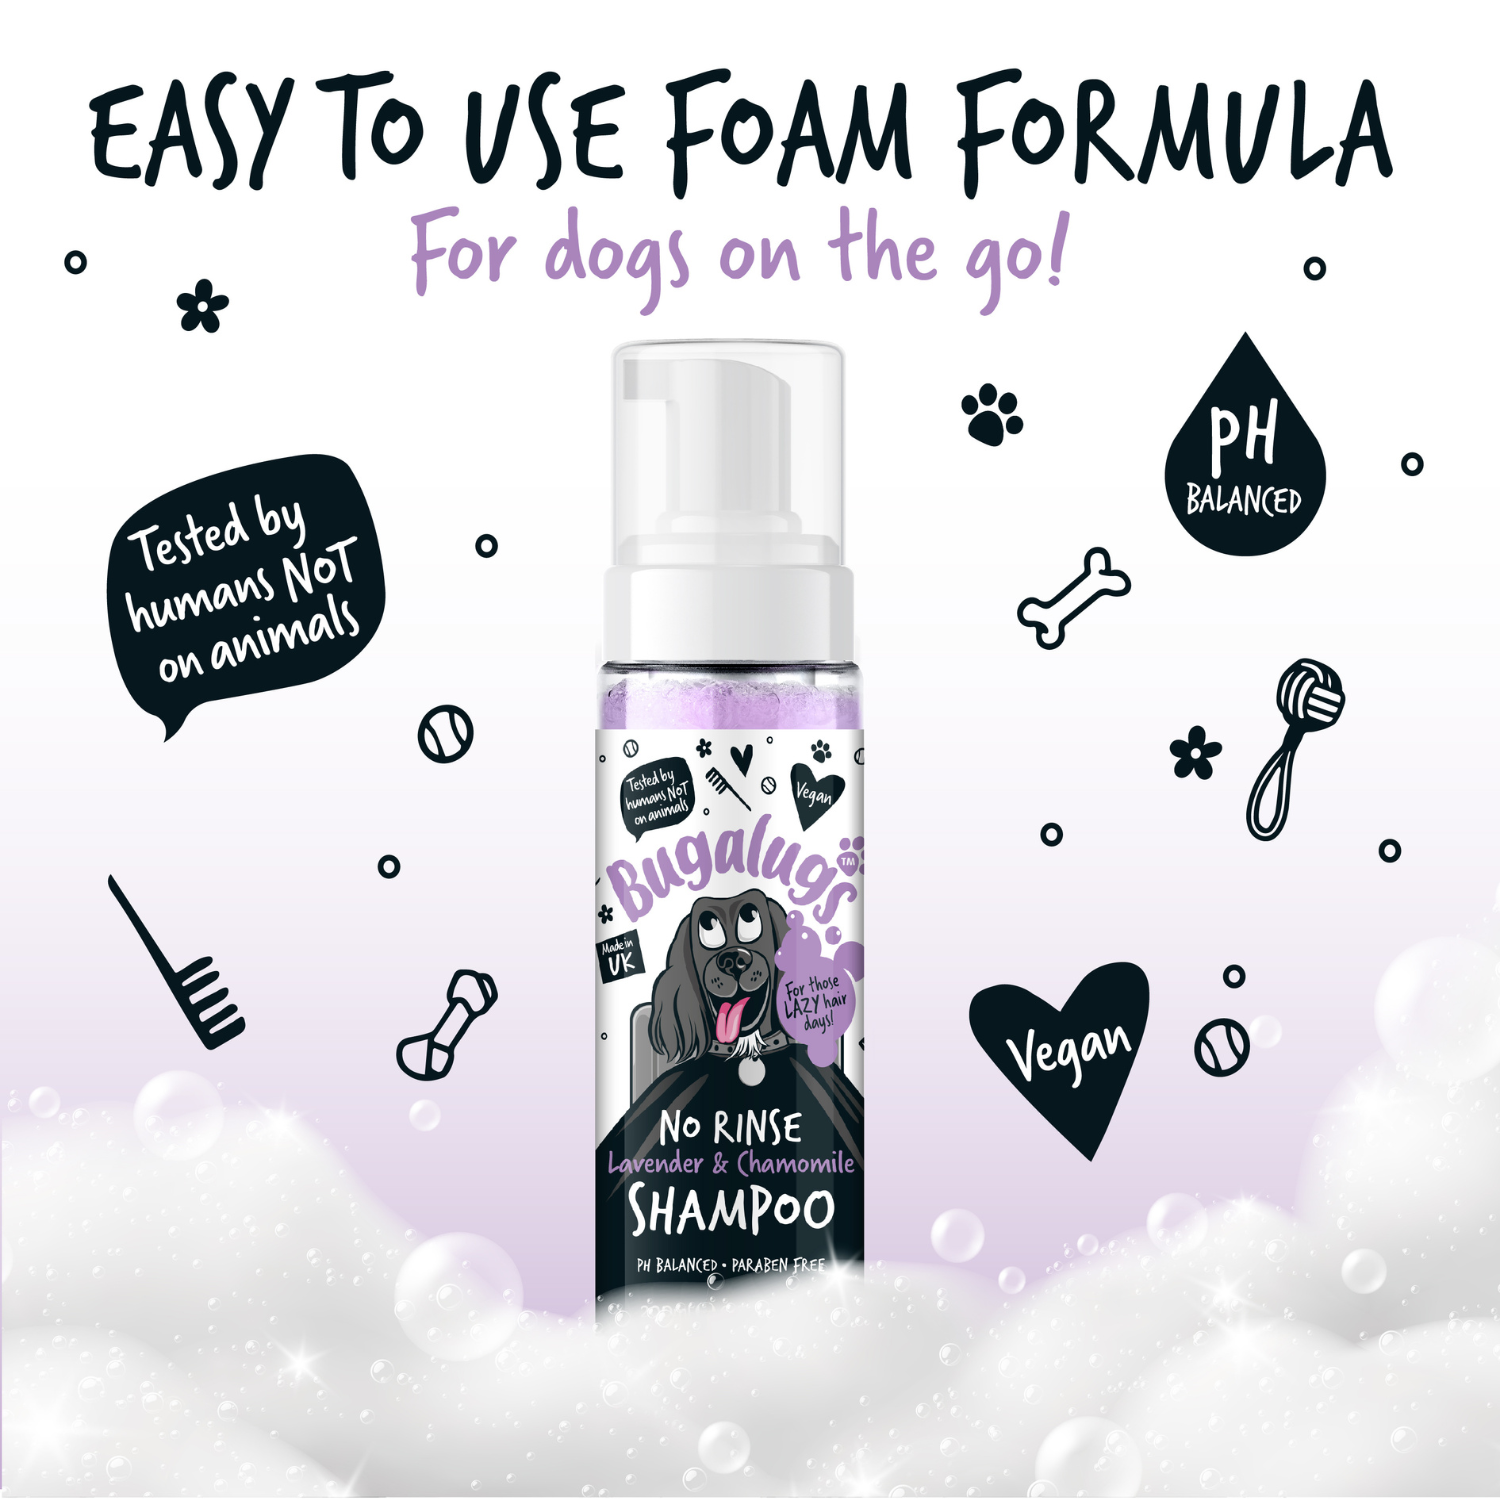 Bugalugs No Rinse Lavender and Chamomile Shampoo for Dogs - Easy to use foam formula for dogs on the go